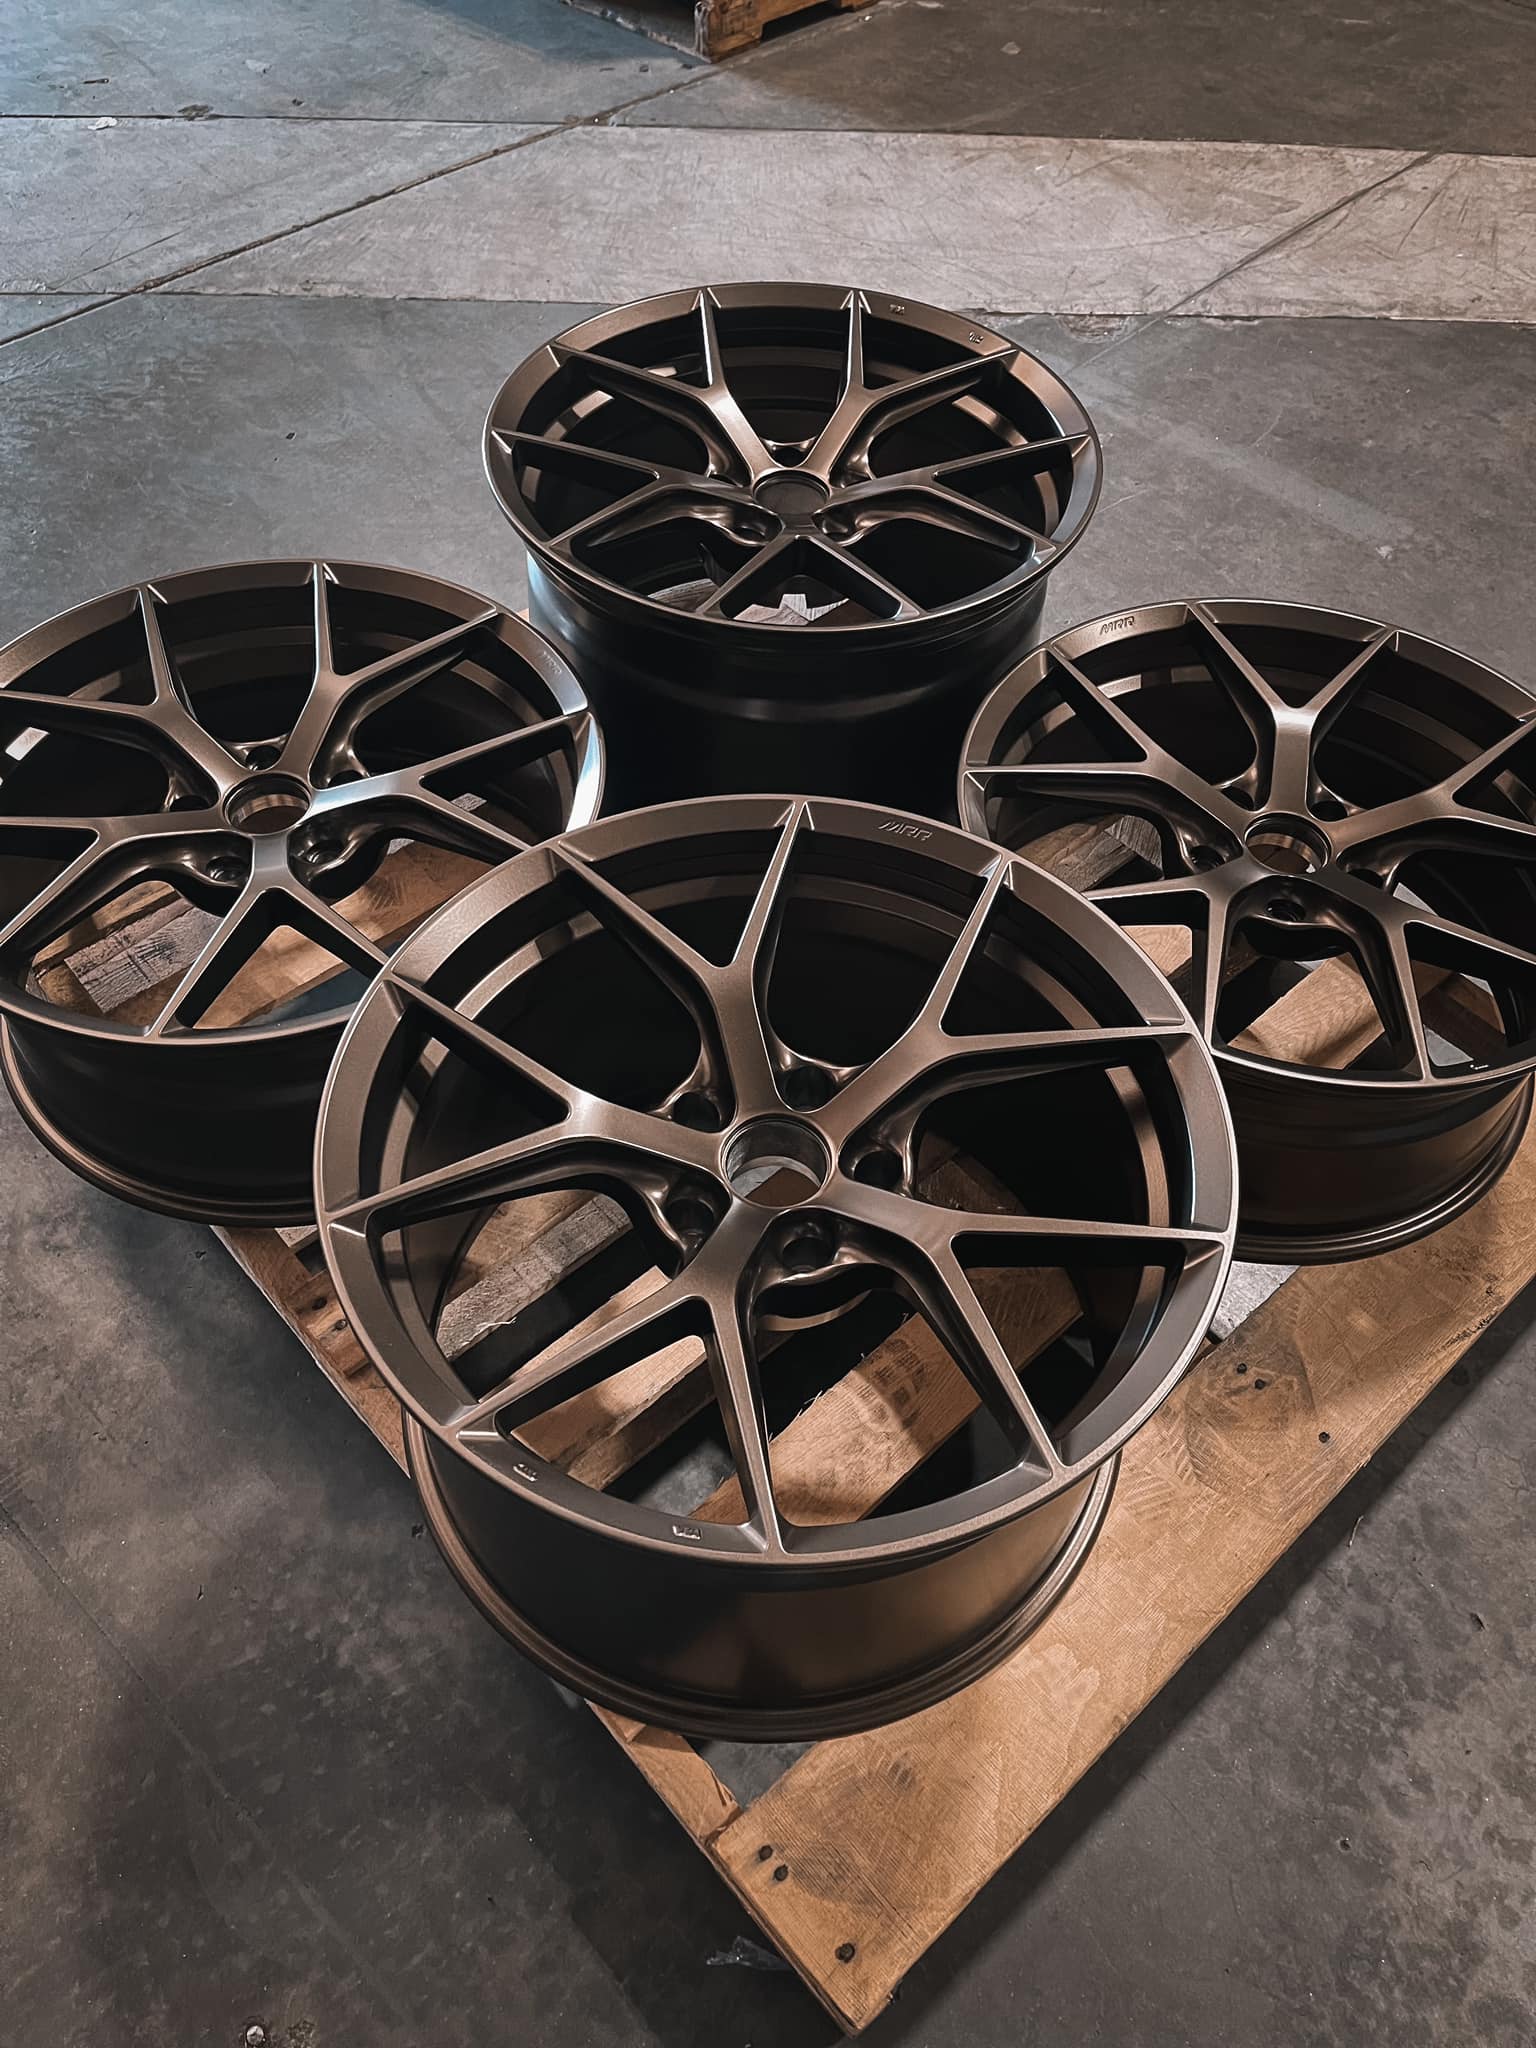 S650 Mustang New** NES Forged Wheels by MRR Design 1pc and 2pc 420195942_7385181824869840_5563299183737422632_n